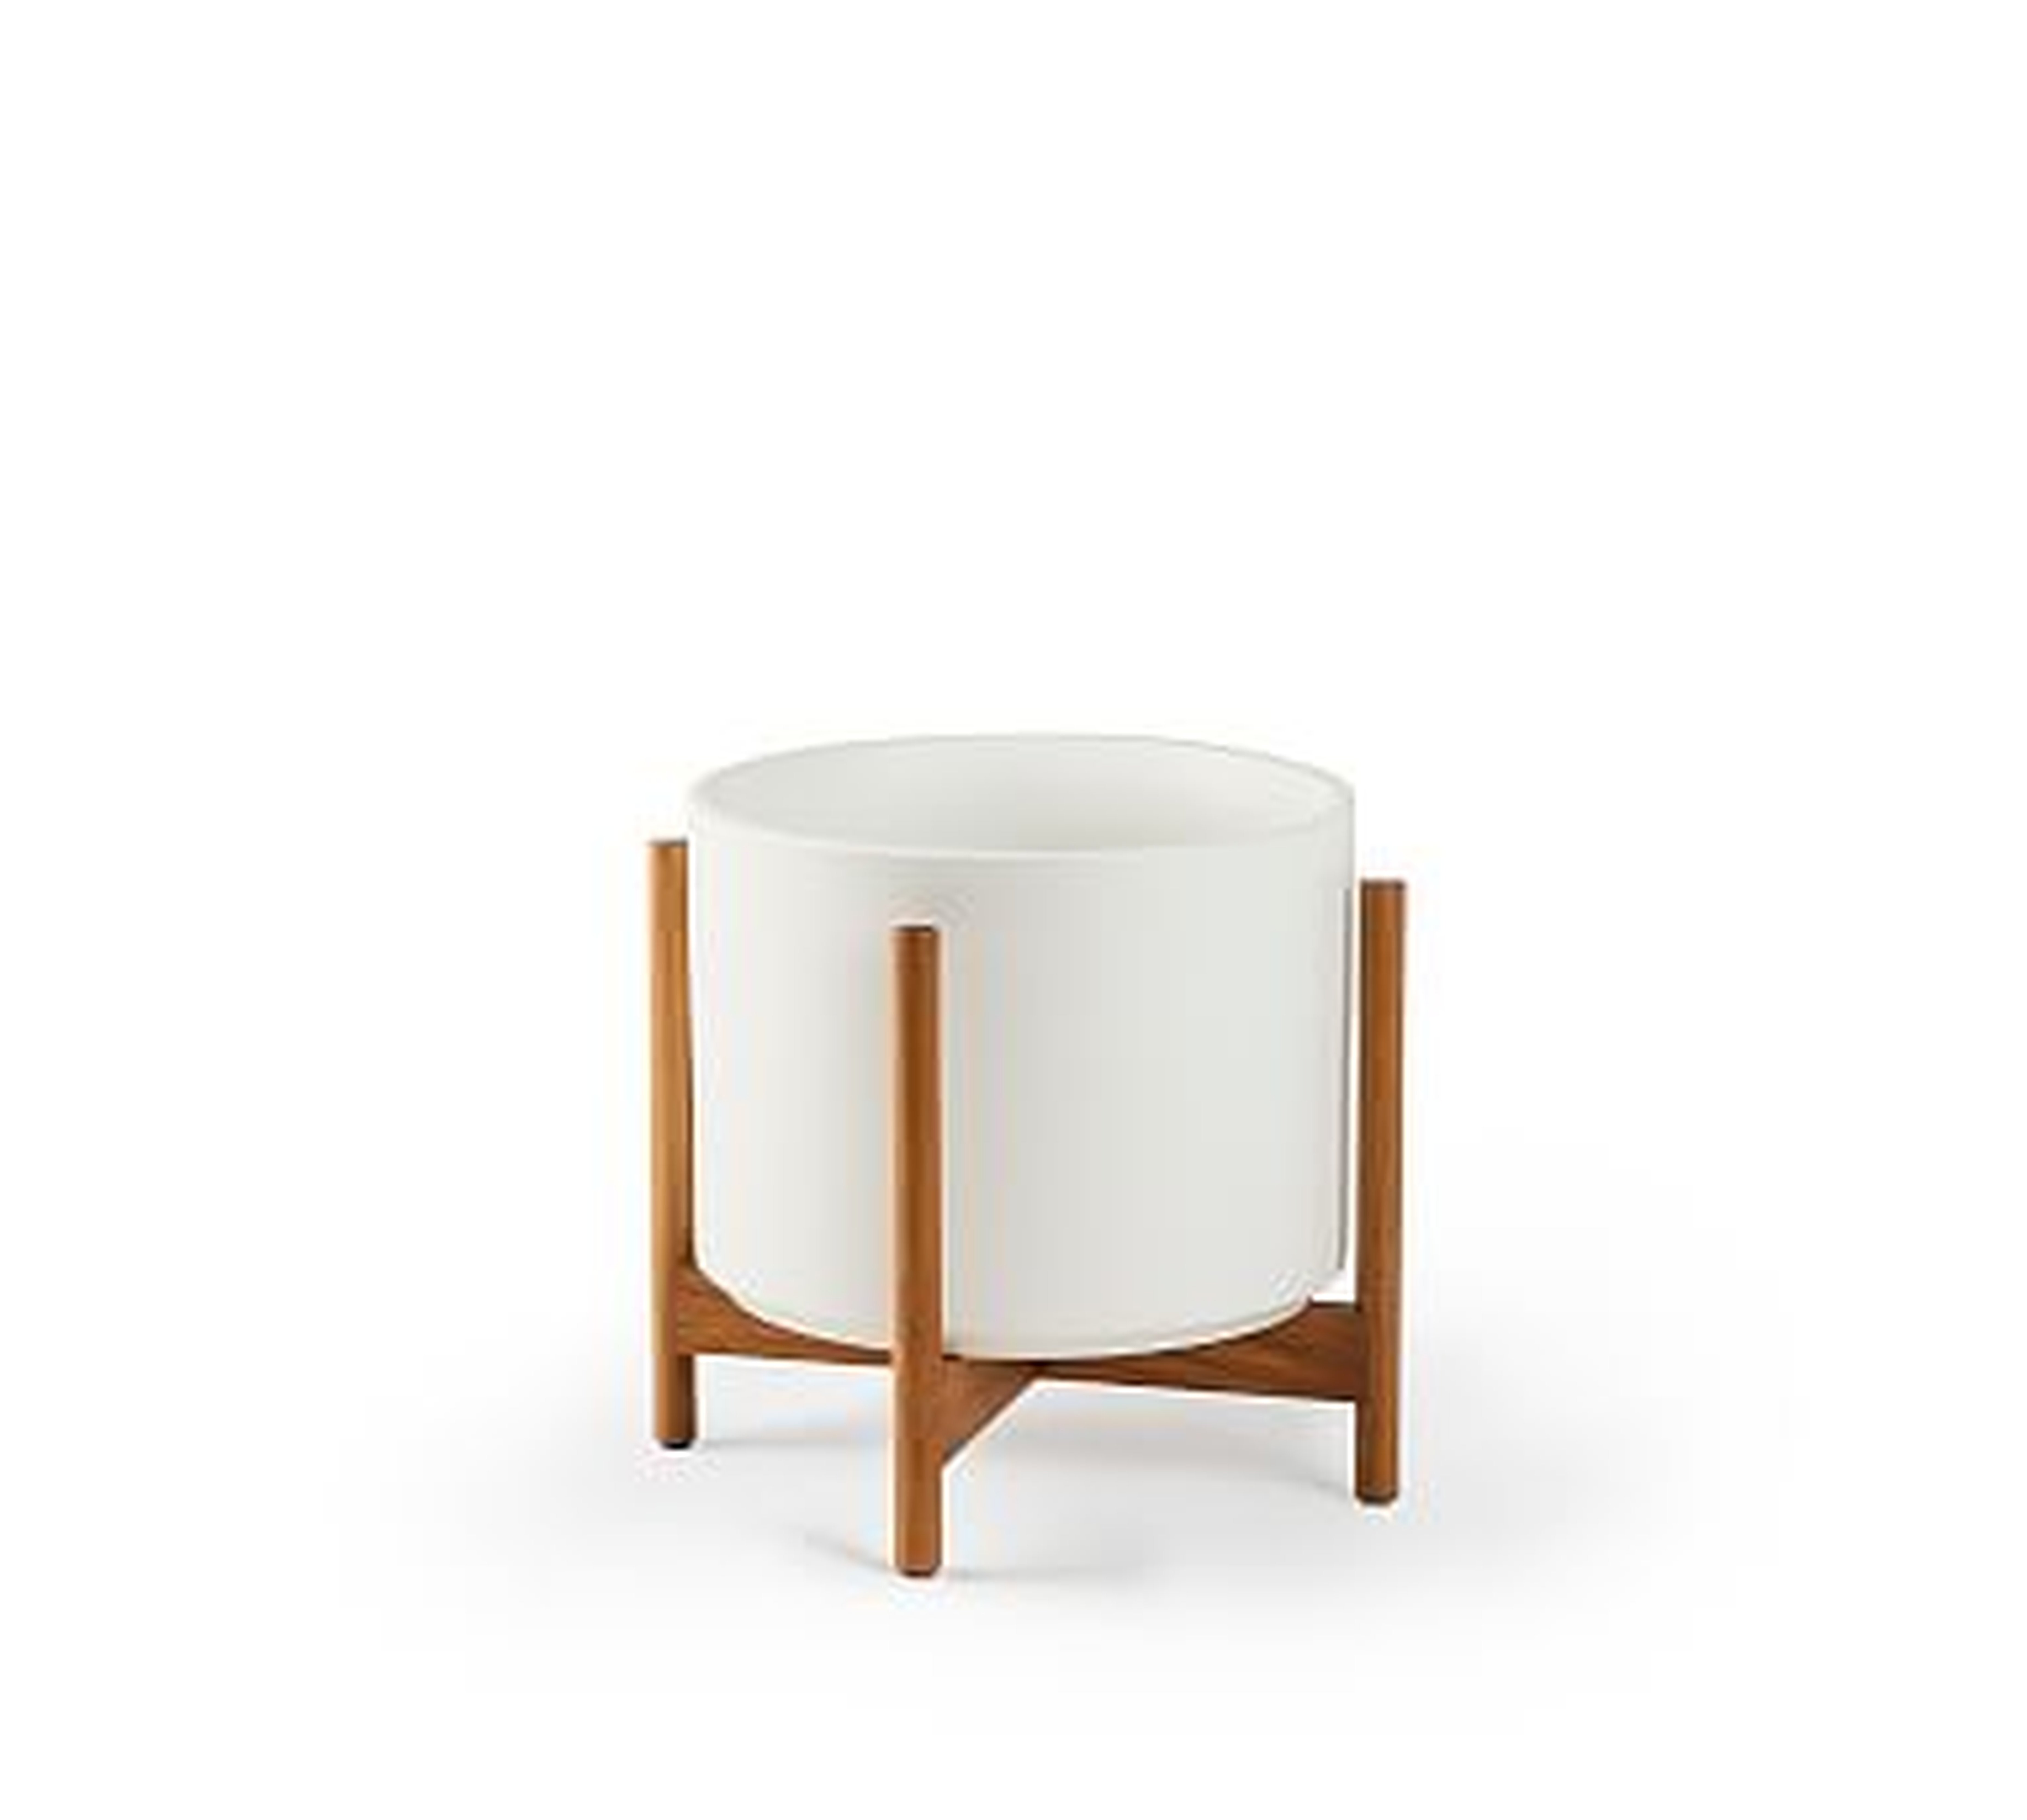 Modern Ceramic Planters with Wooden Stand, White - Mini - Pottery Barn